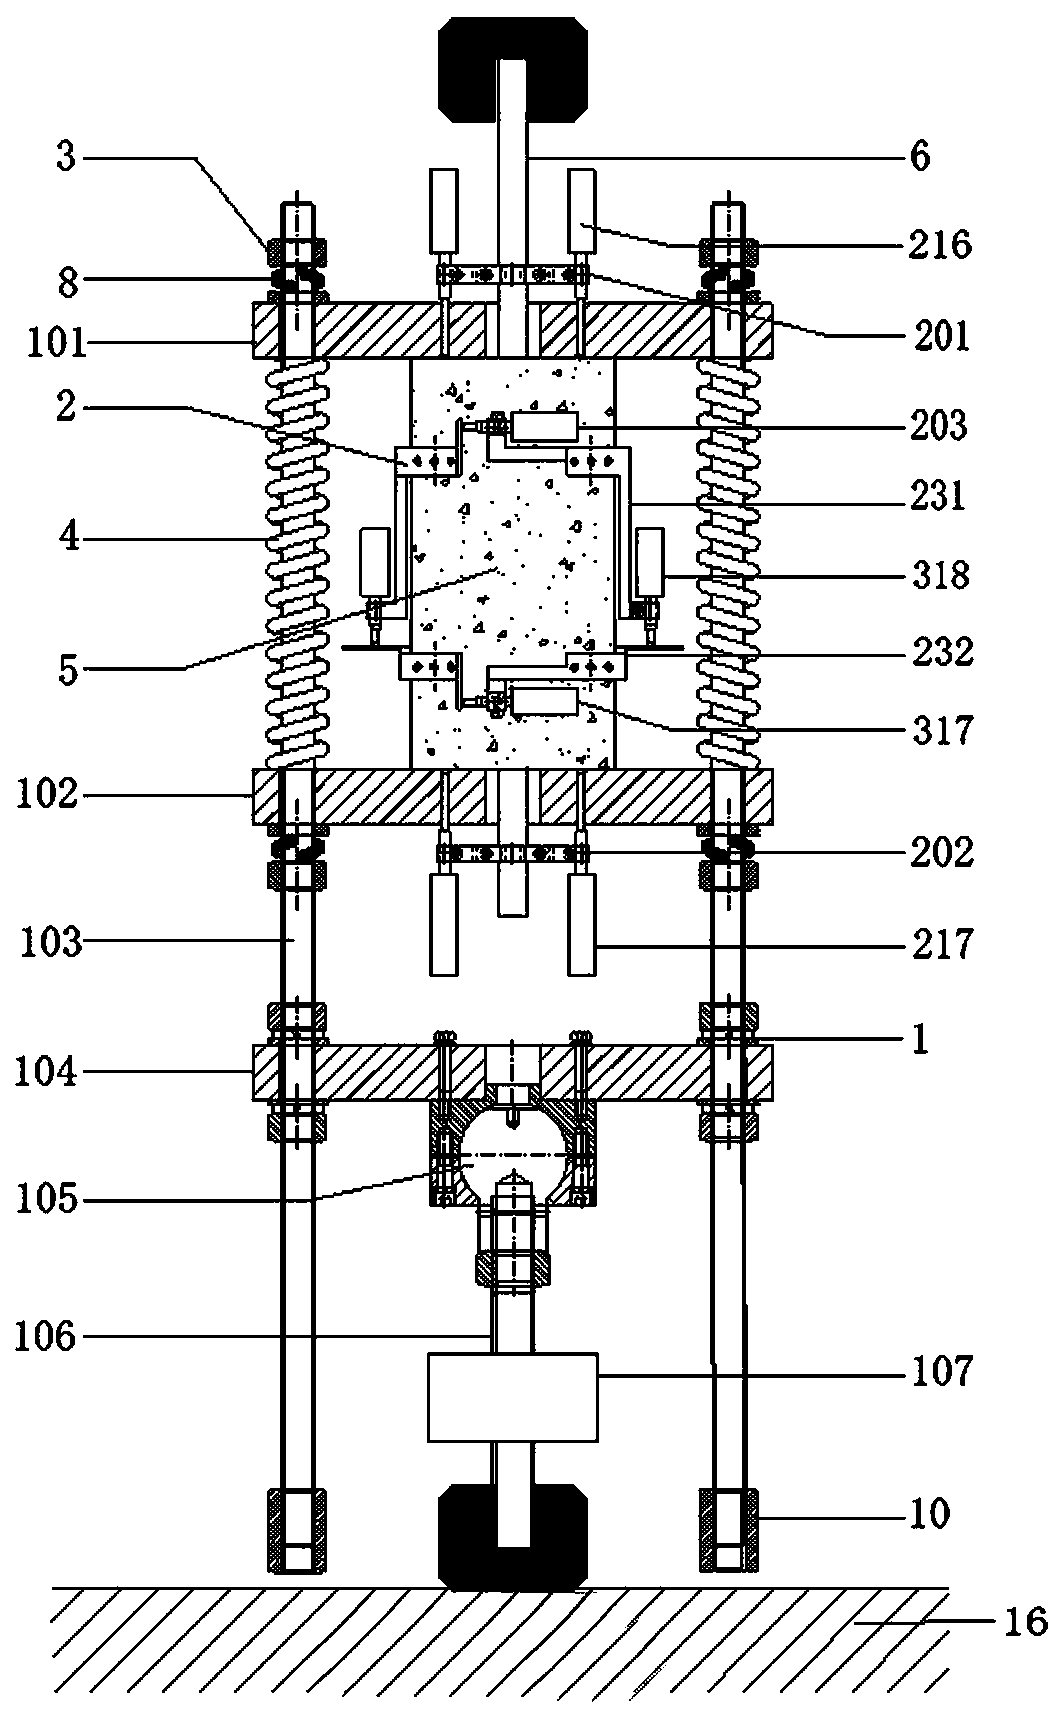 Device and method for testing bond performance between reinforced bar and concrete under repeated load